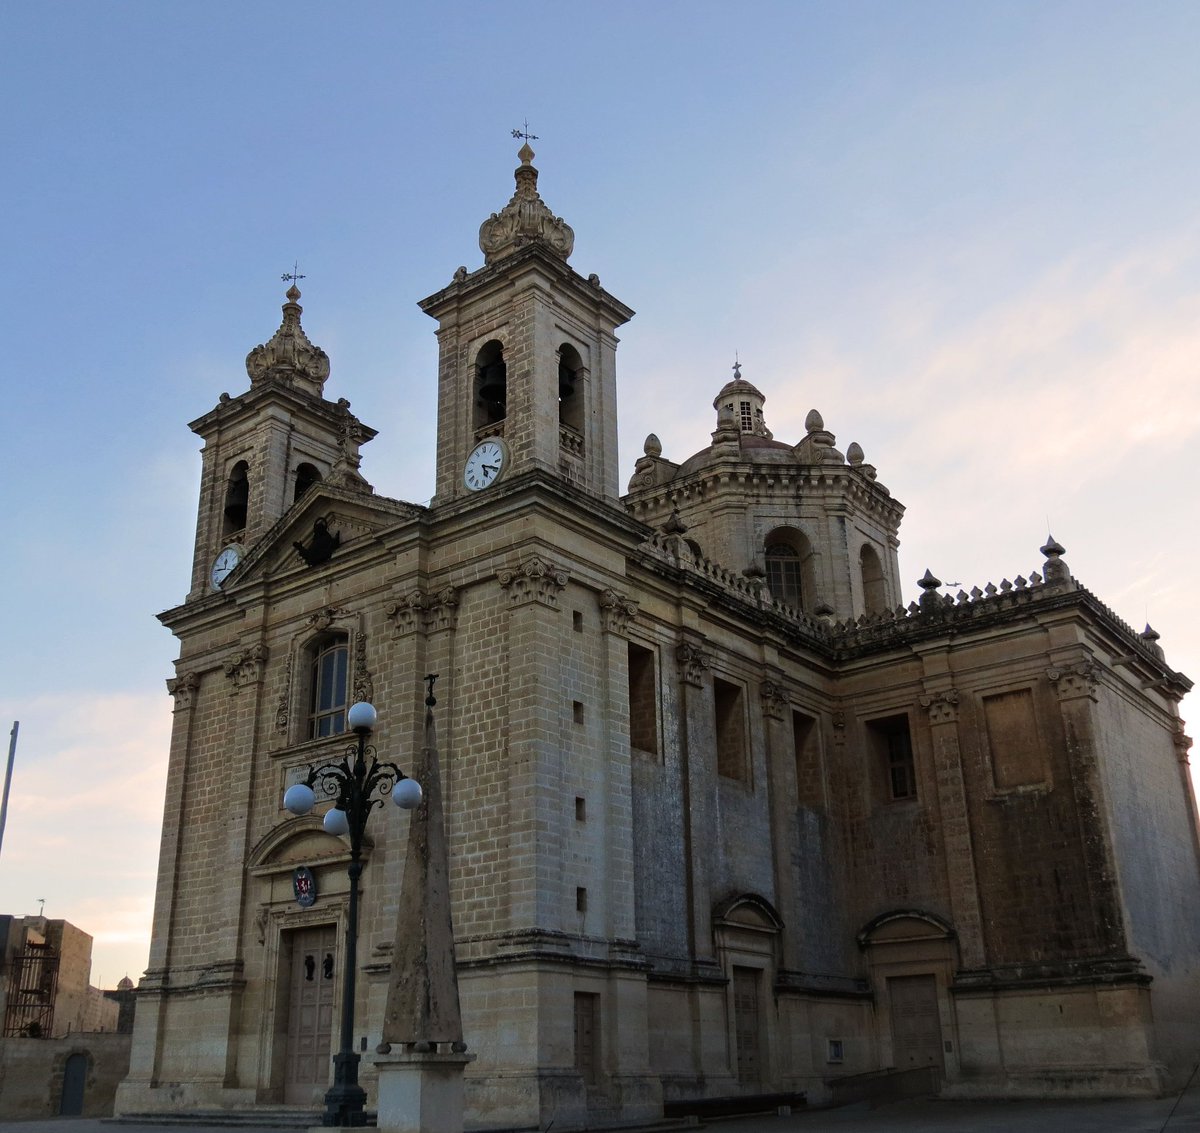 Lija is a small village in the Central Region of Malta. It forms part of the Three villages of Malta, along with Attard and Balzan. Lija has a baroque parish church and seven other small chapels. 
 #discover #discoverearth #sejour  #visitmalta #maltatravel